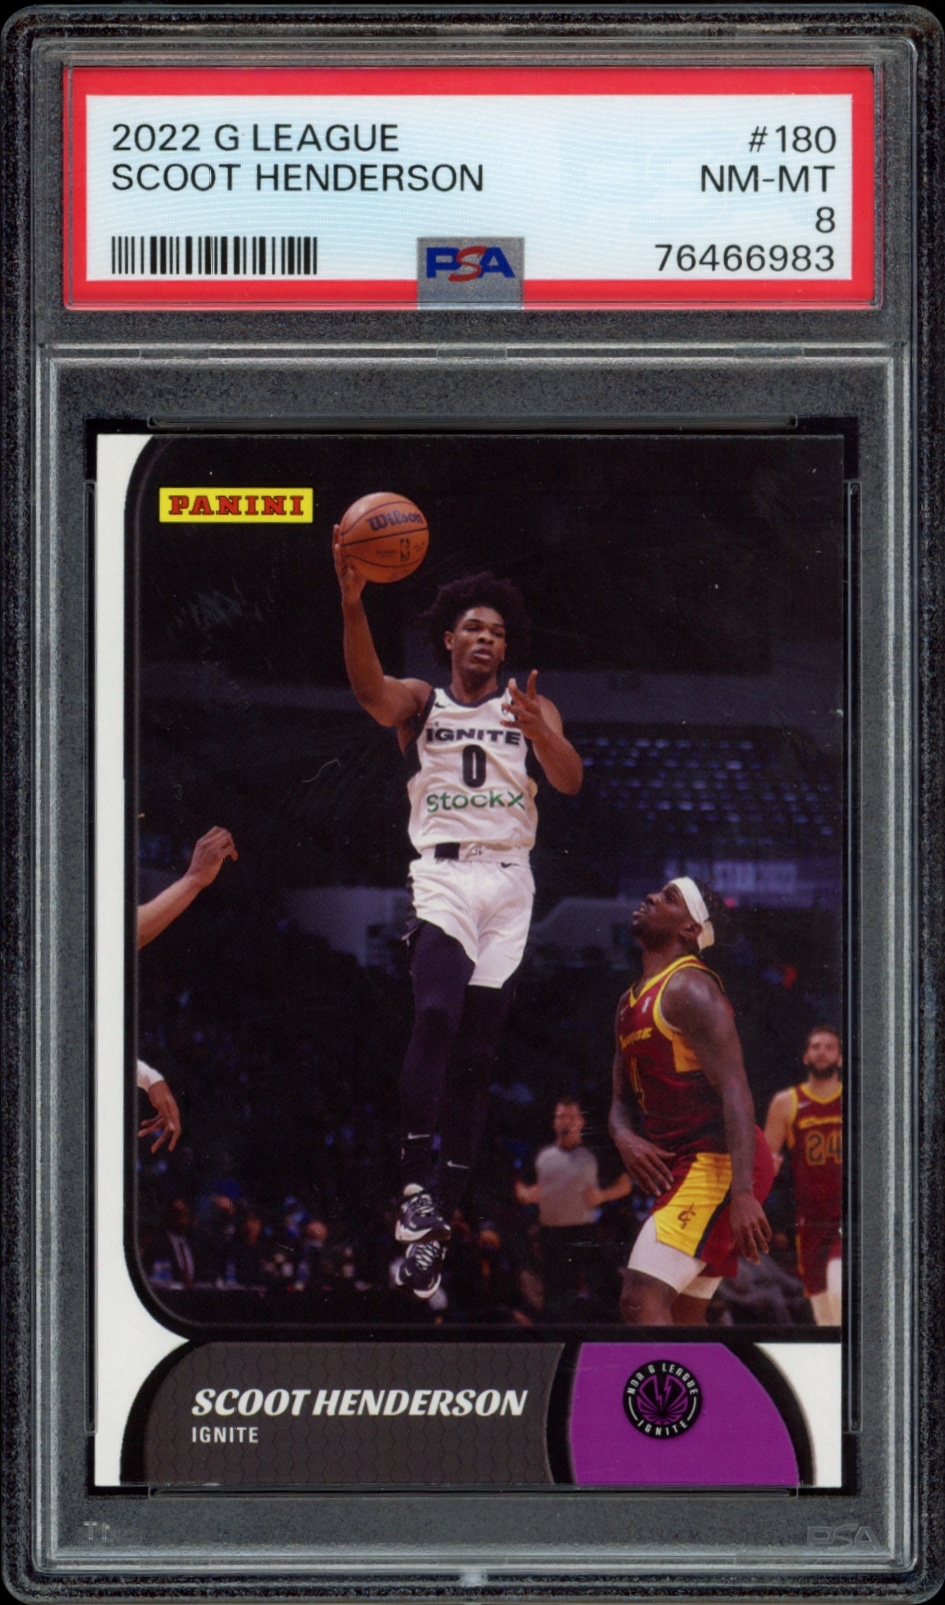 Scoot Henderson in action on 2021-22 Panini NBA G League card #180, graded NM-MT 8 by PSA.